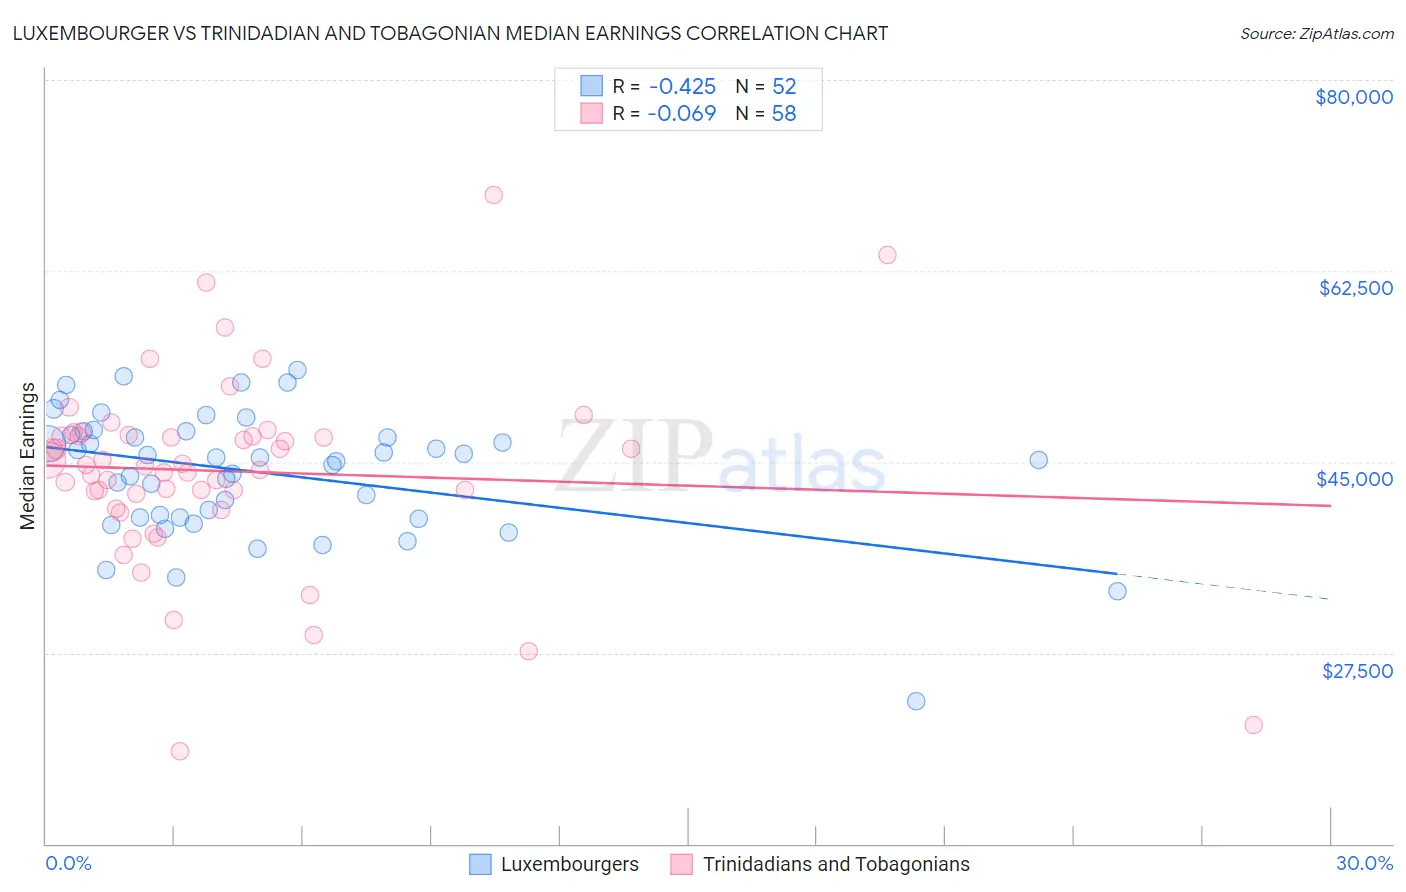 Luxembourger vs Trinidadian and Tobagonian Median Earnings